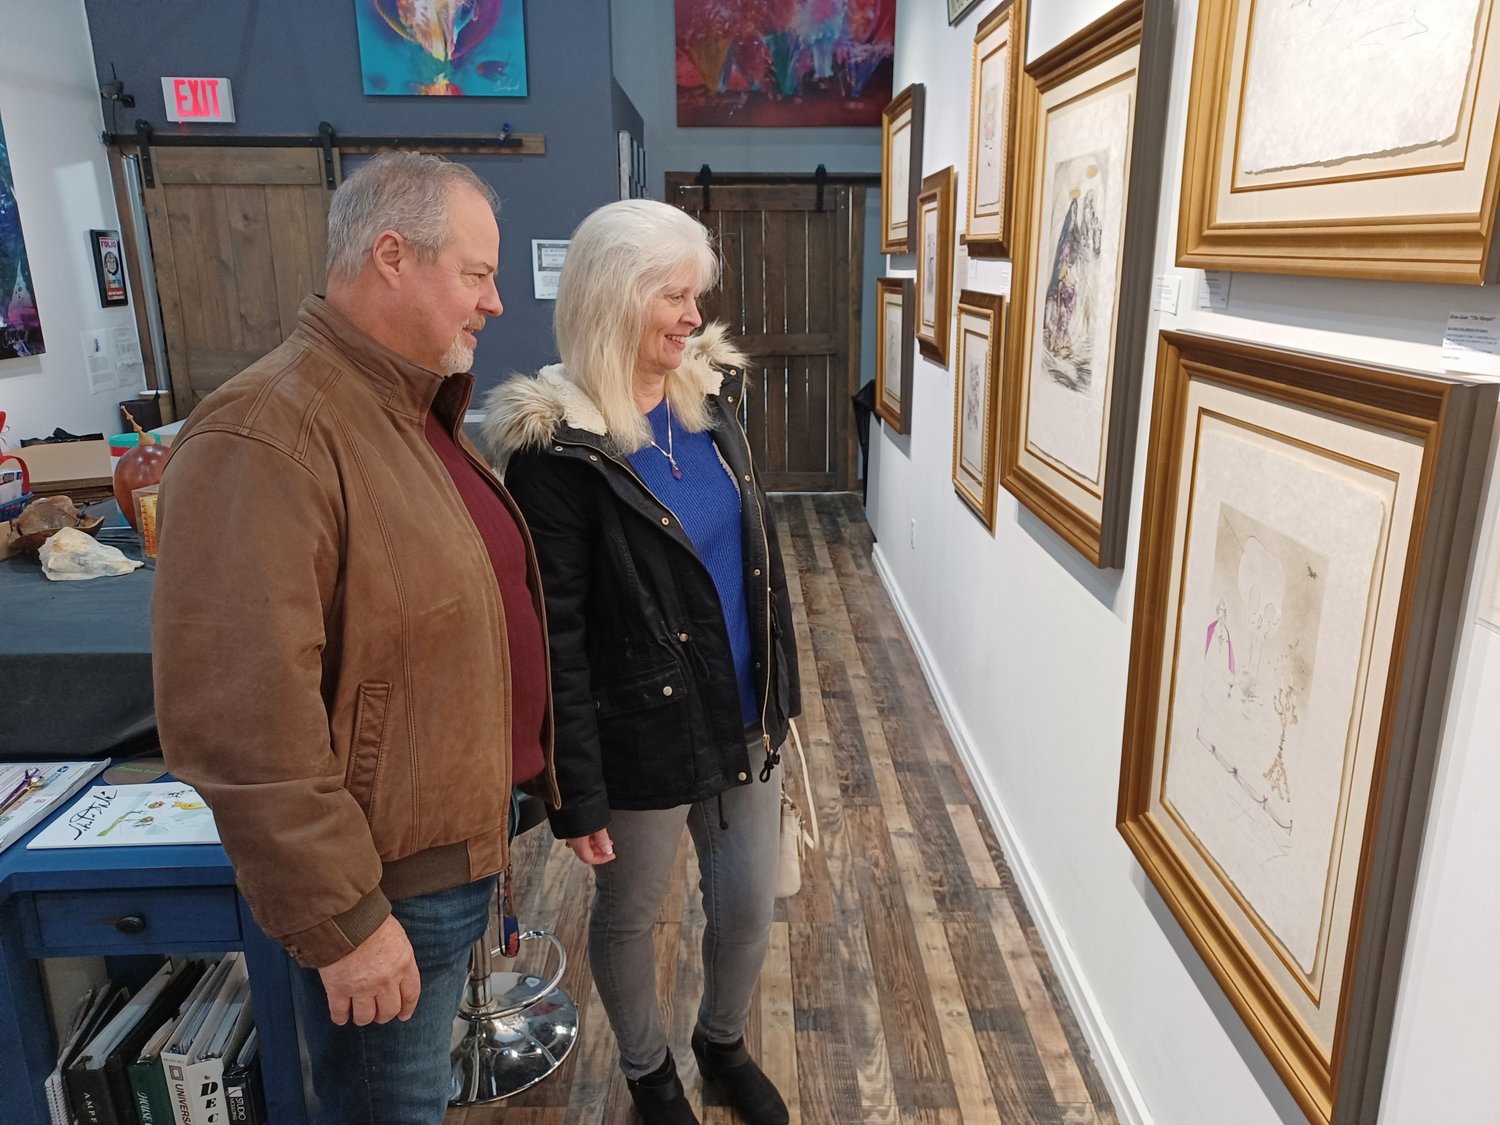 Chris and Marci Connelly examine etchings by Salvador Dali, currently on display at Gallery 725 in Jacksonville Beach.